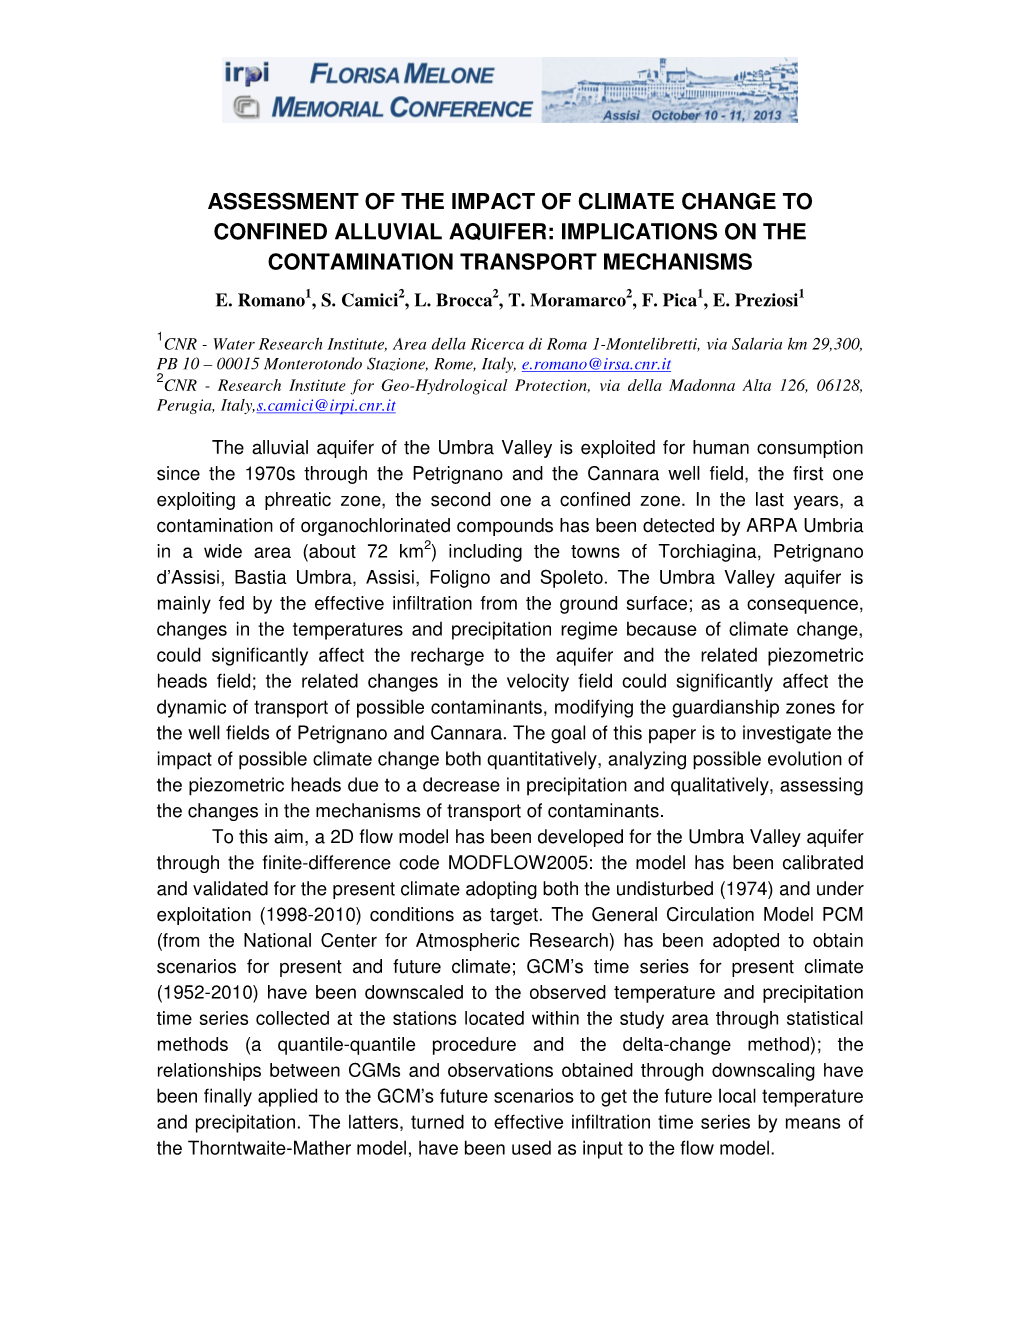 Assessment of the Impact of Climate Change to Confined Alluvial Aquifer: Implications on the Contamination Transport Mechanisms